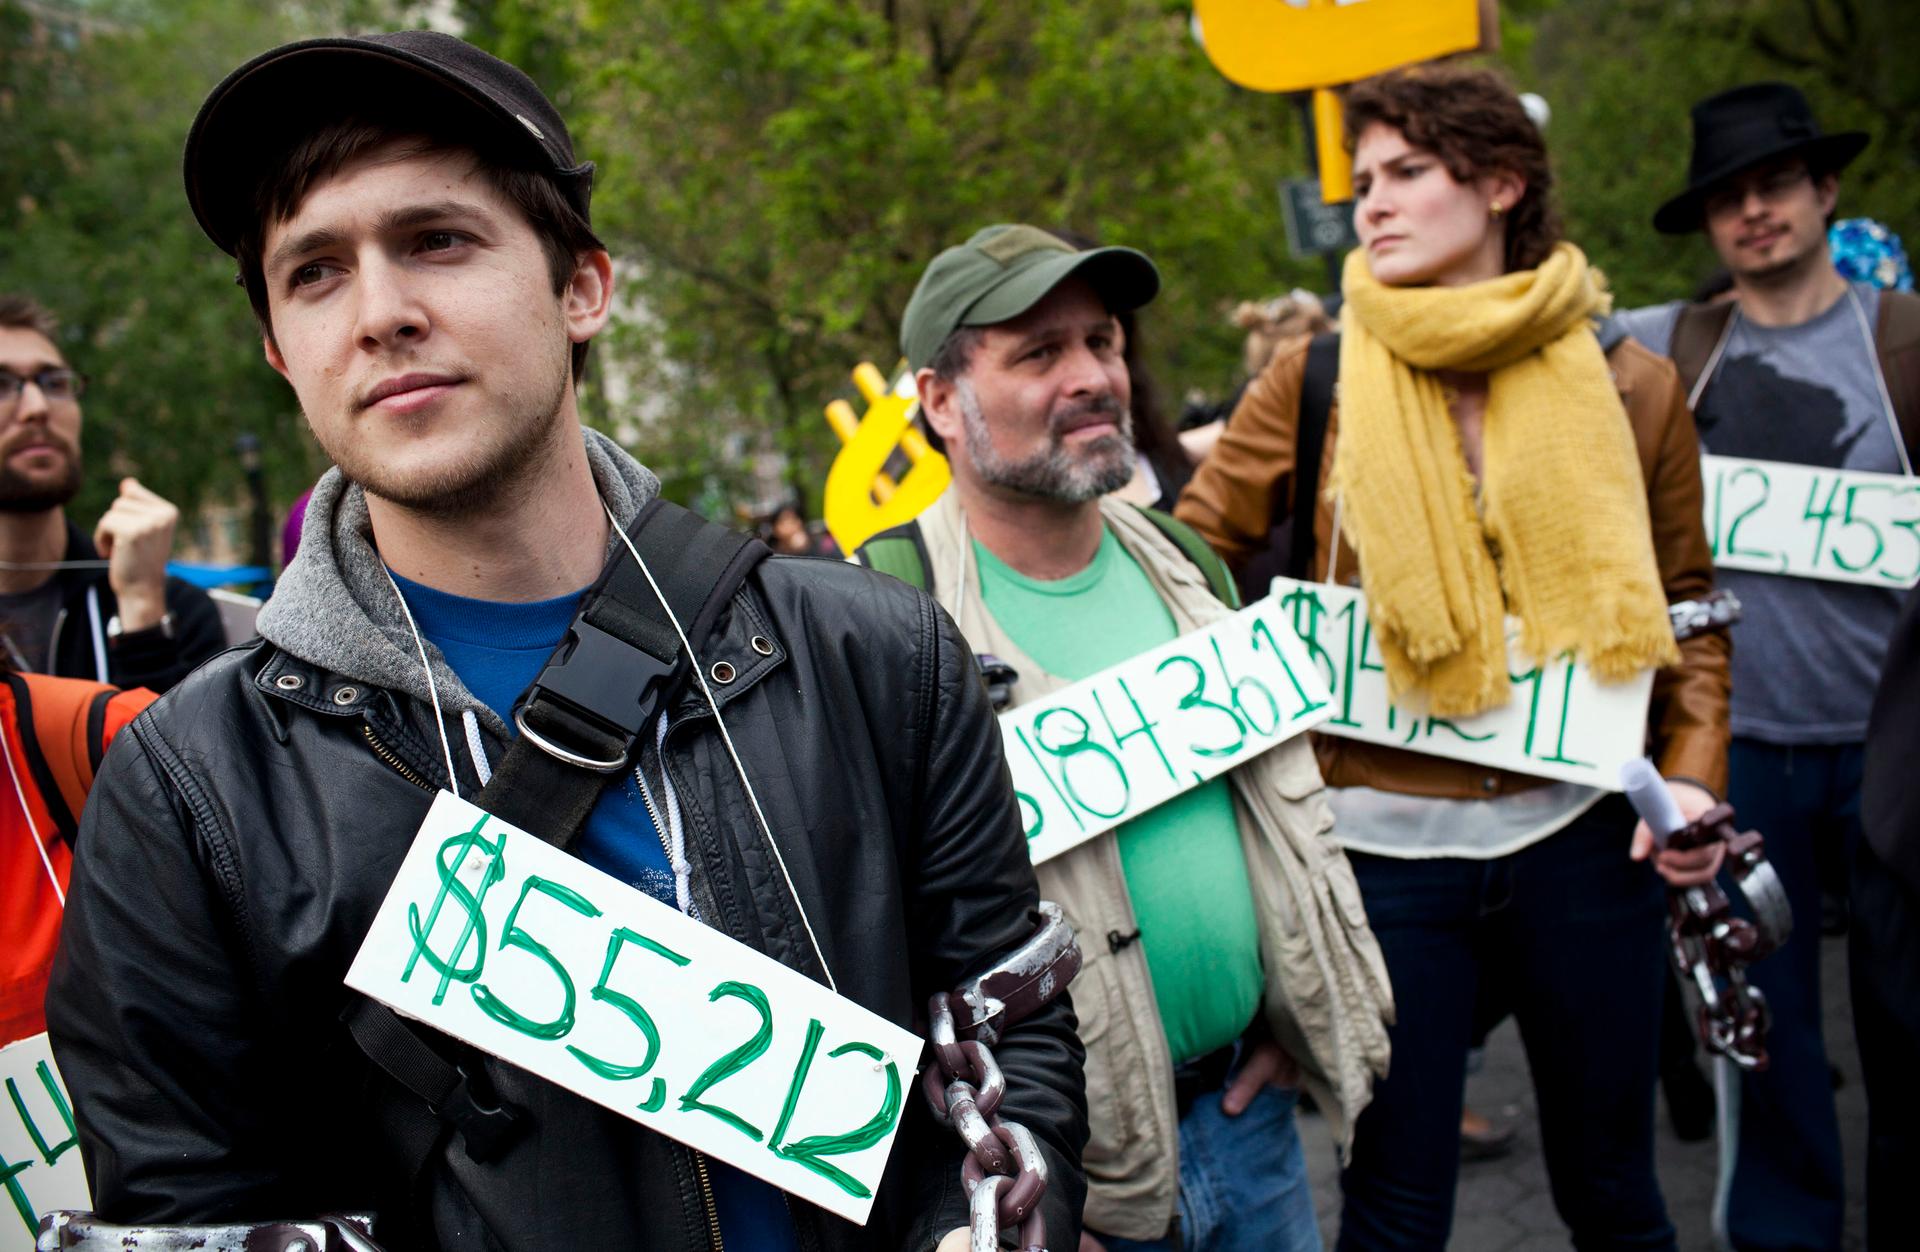 Occupy Wall Street demonstrators wear signs around their neck representing their student debt during a protest against the rising national student debt in New York on April 25, 2012.